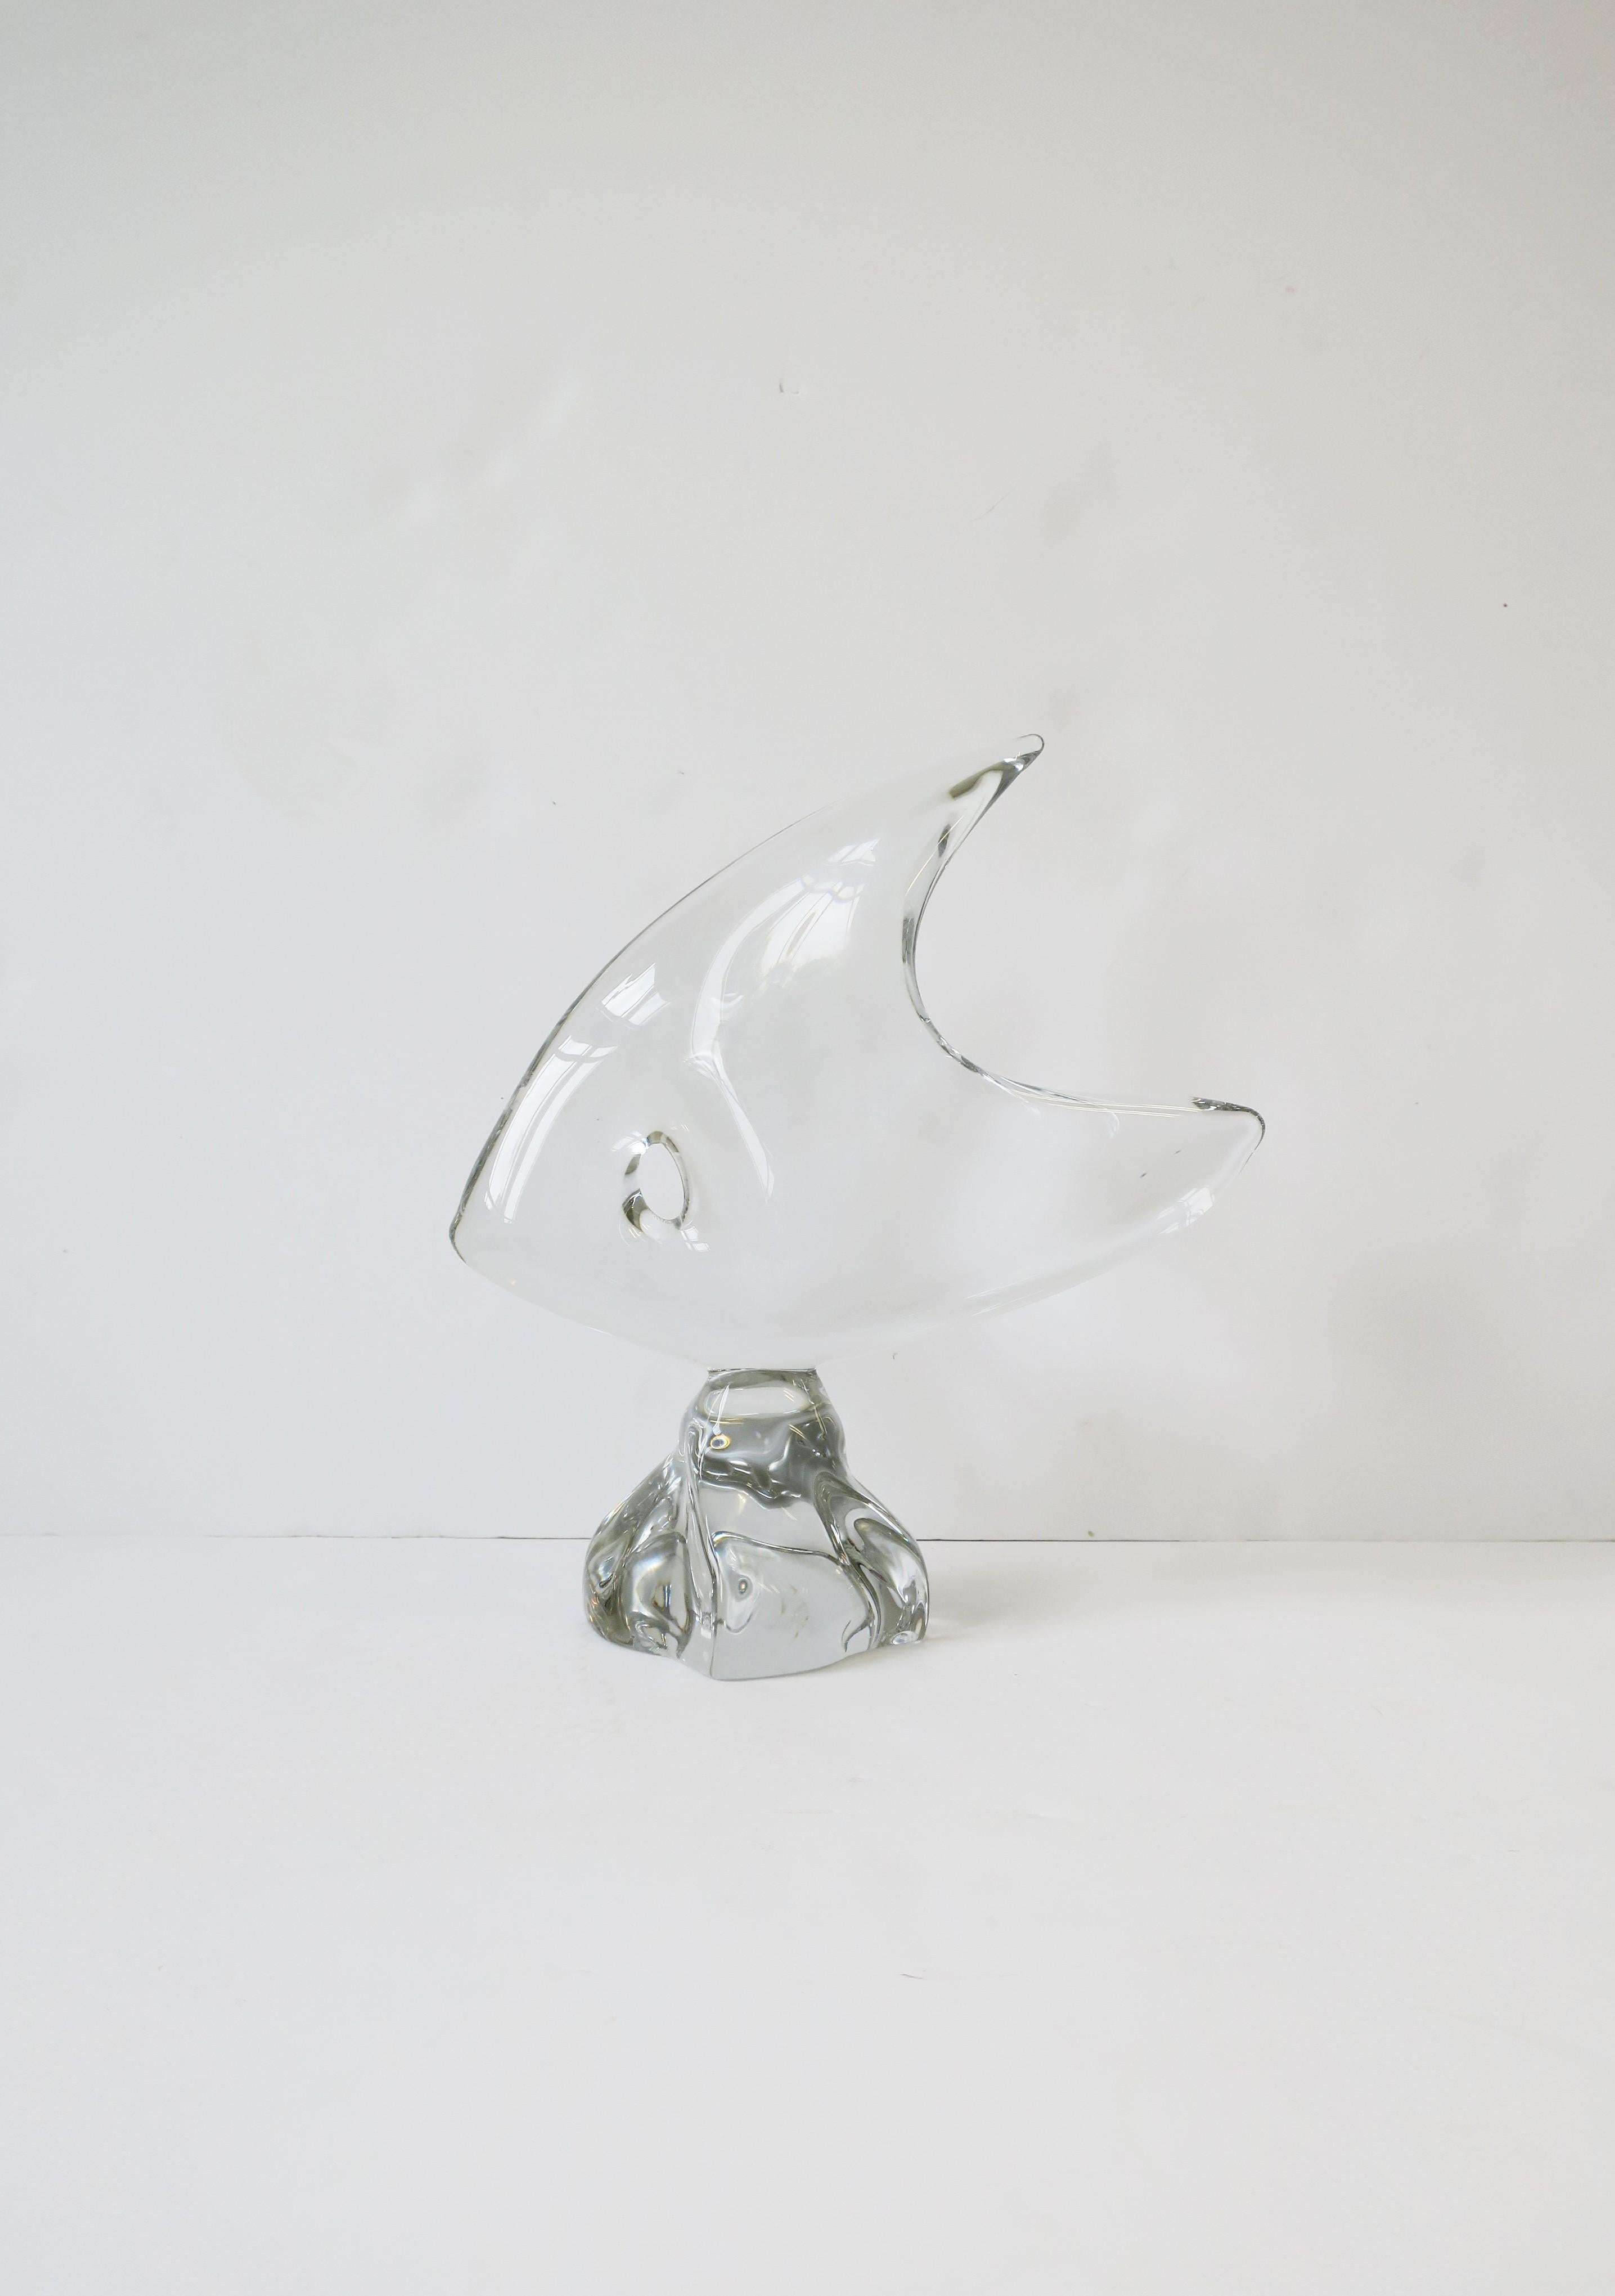 A beautiful, substantial and rare French crystal art glass tropical fish sculpture decorative object from Cristallerie Moser-Millot, circa mid-20th century, Paris, France. With maker's mark on bottom as shown in image #13. Piece is a nice size